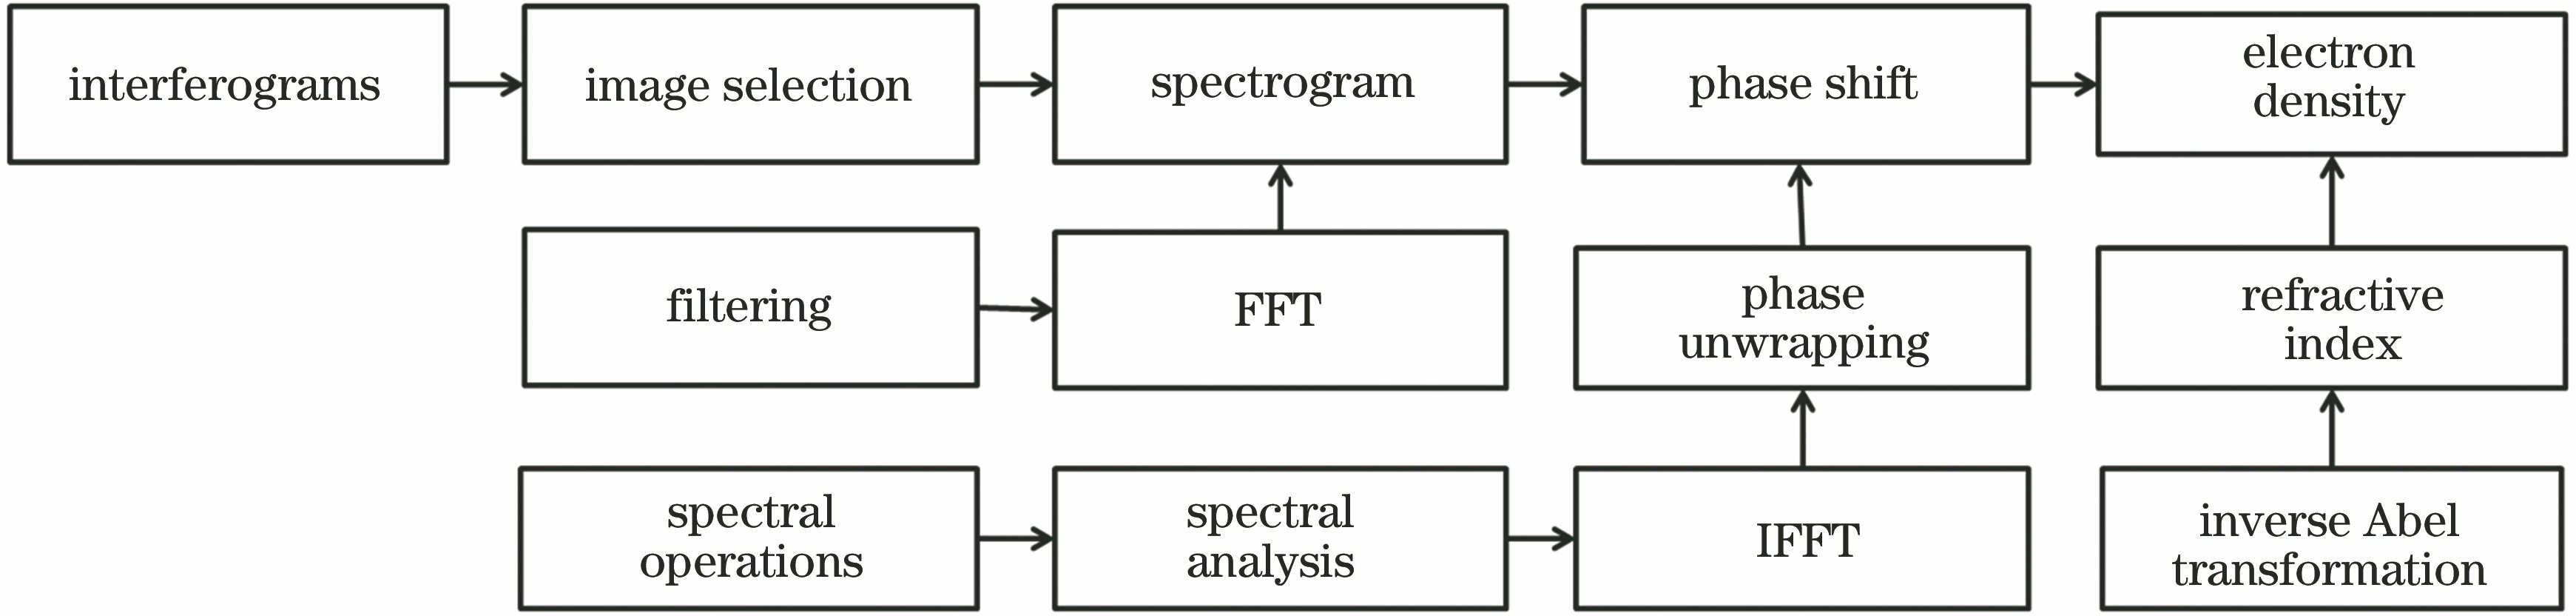 Flow chart of interference image processing